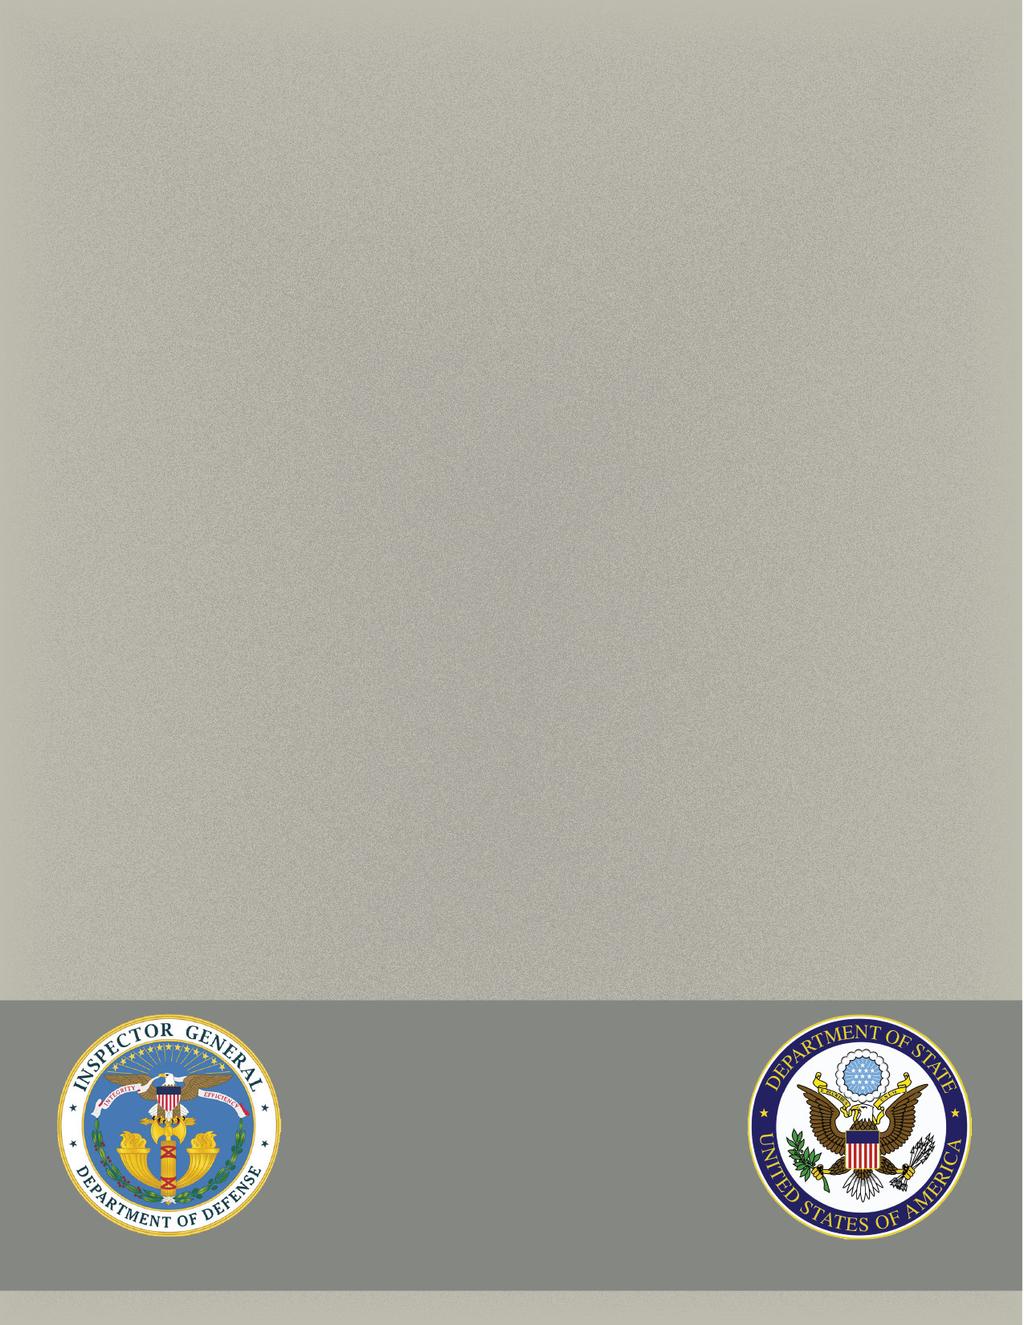 Dod report no. d-2011-102 dos report no. Aud/cG-11-44 Department of State Office of Inspector General 2201 C 